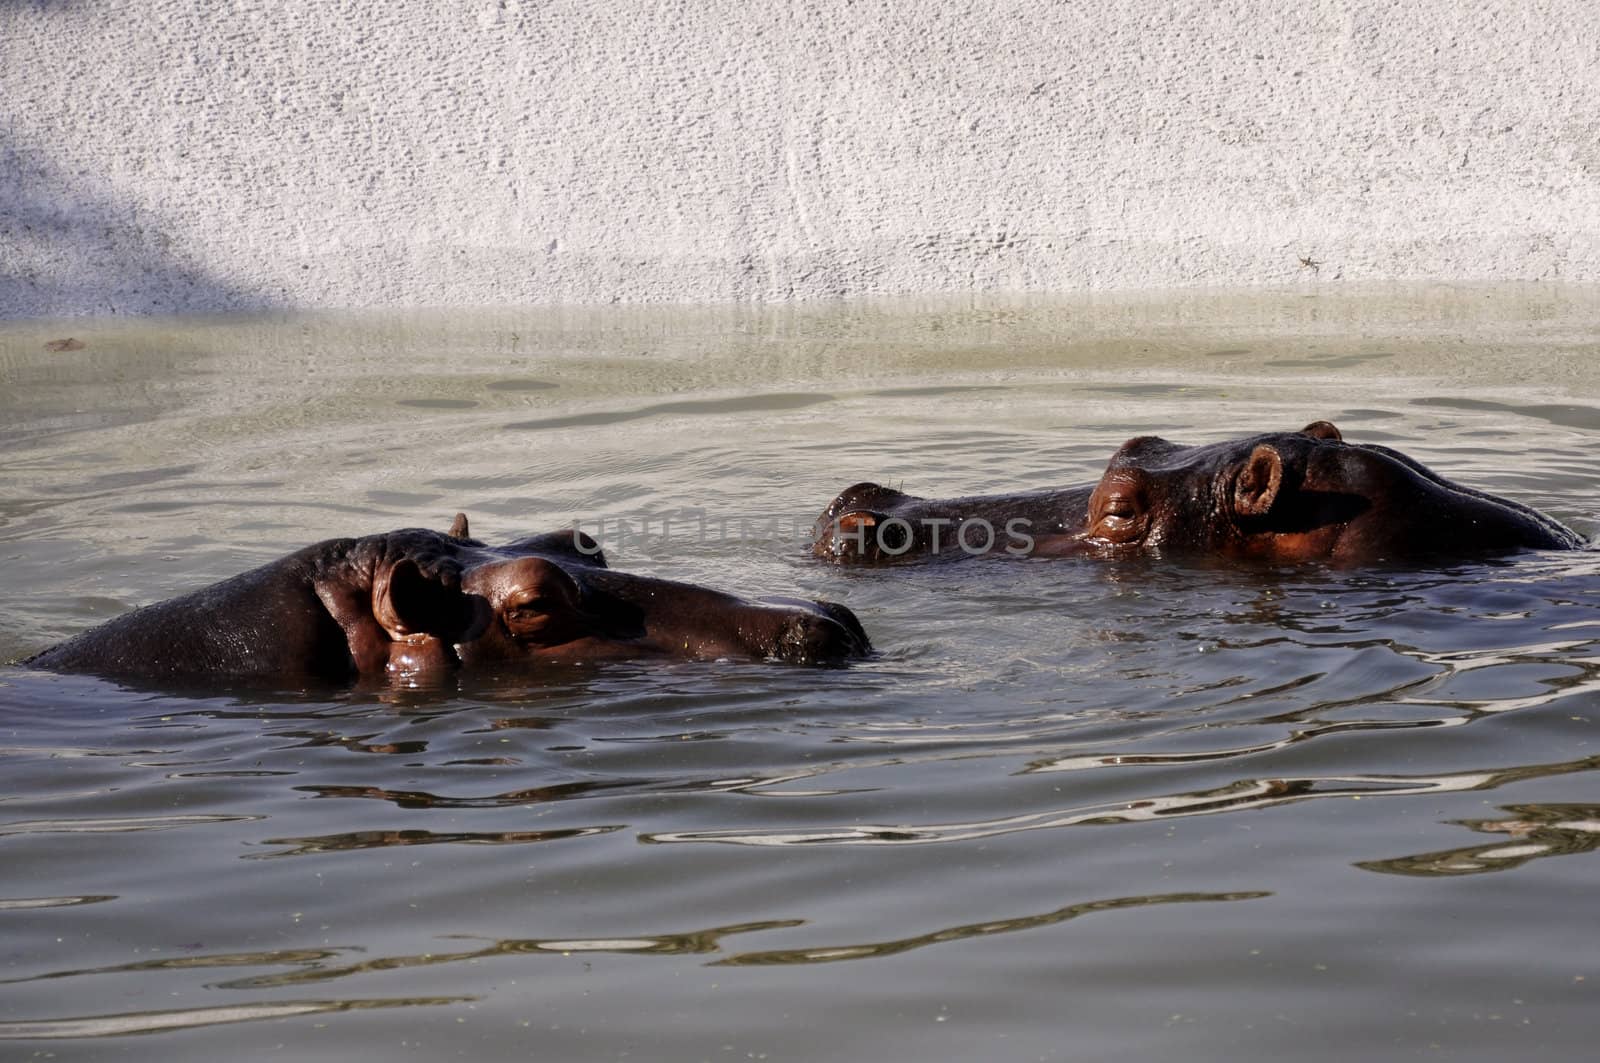 Hippopotamuses keeping themselves cool on a sunny day